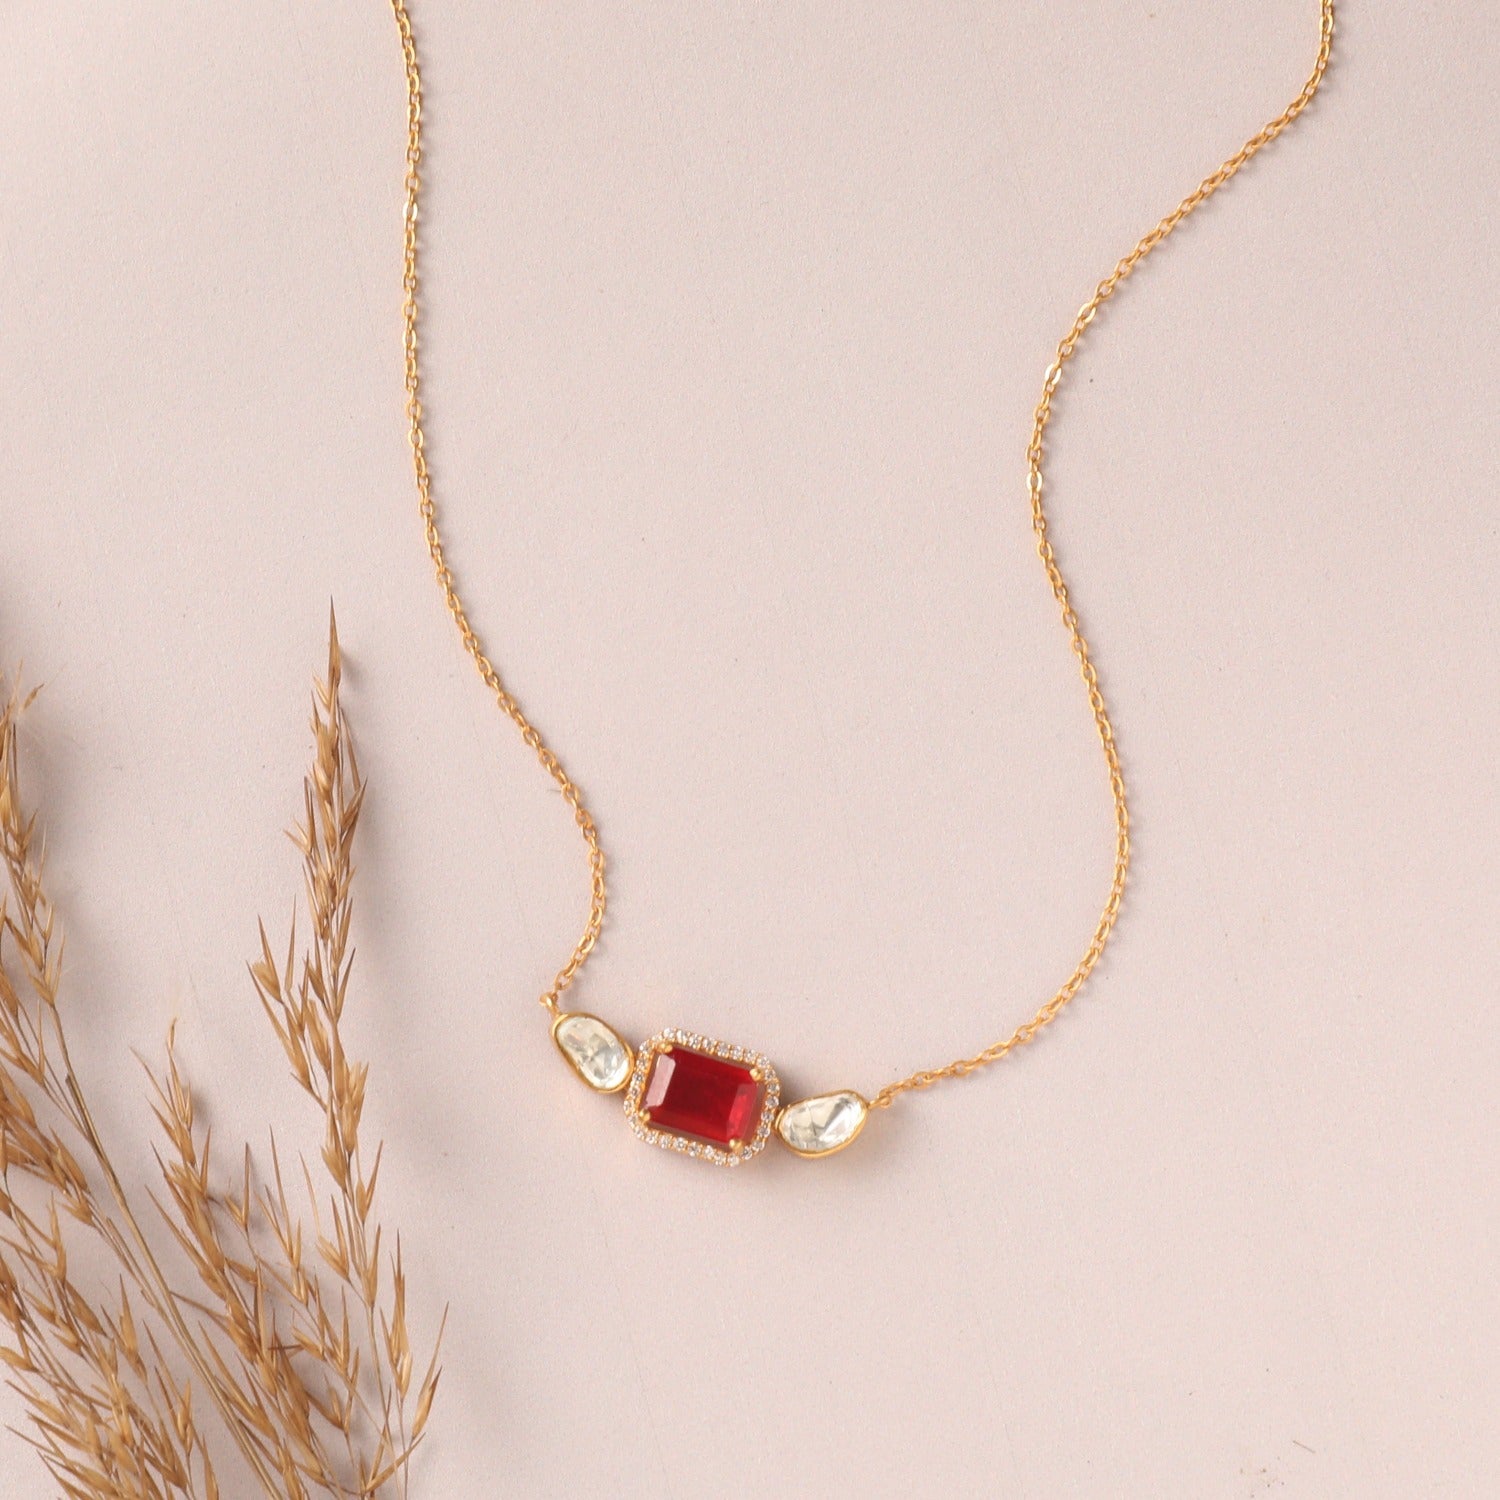 RED RUBY NECKLACE | Rebekajewelry